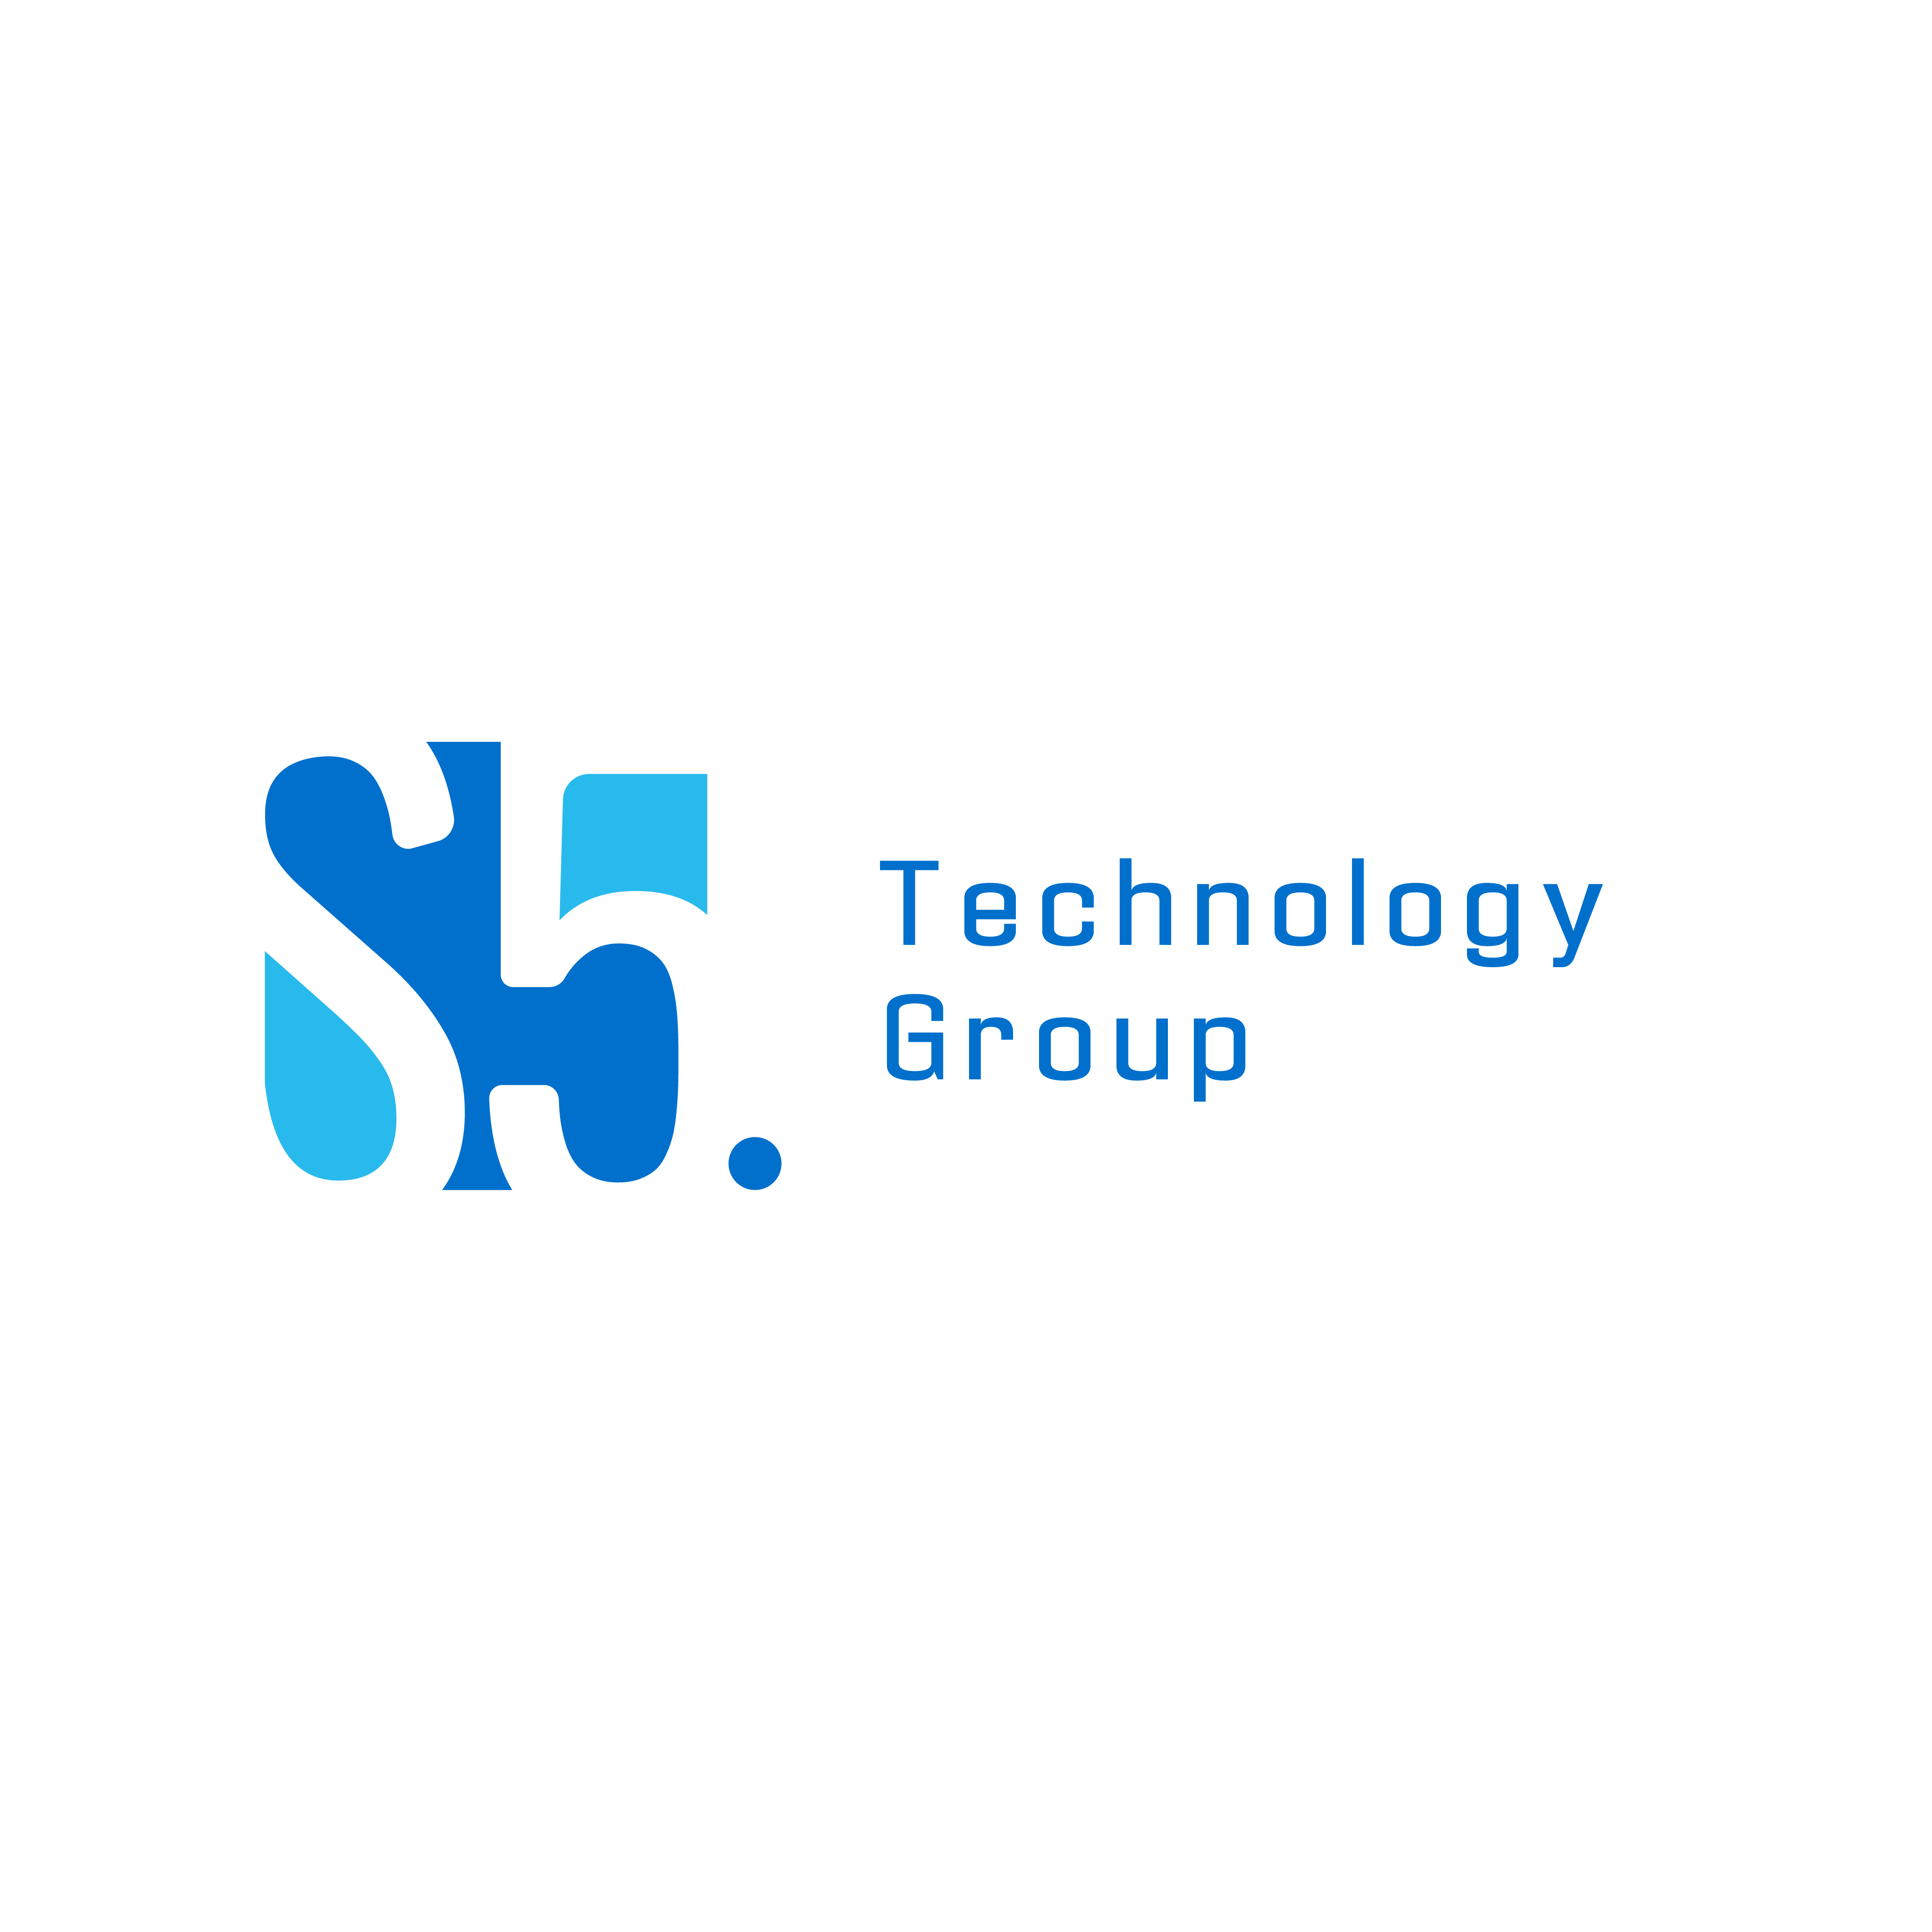 S5 Technology Group - Cowra, NSW 2794 - (02) 6341 4060 | ShowMeLocal.com